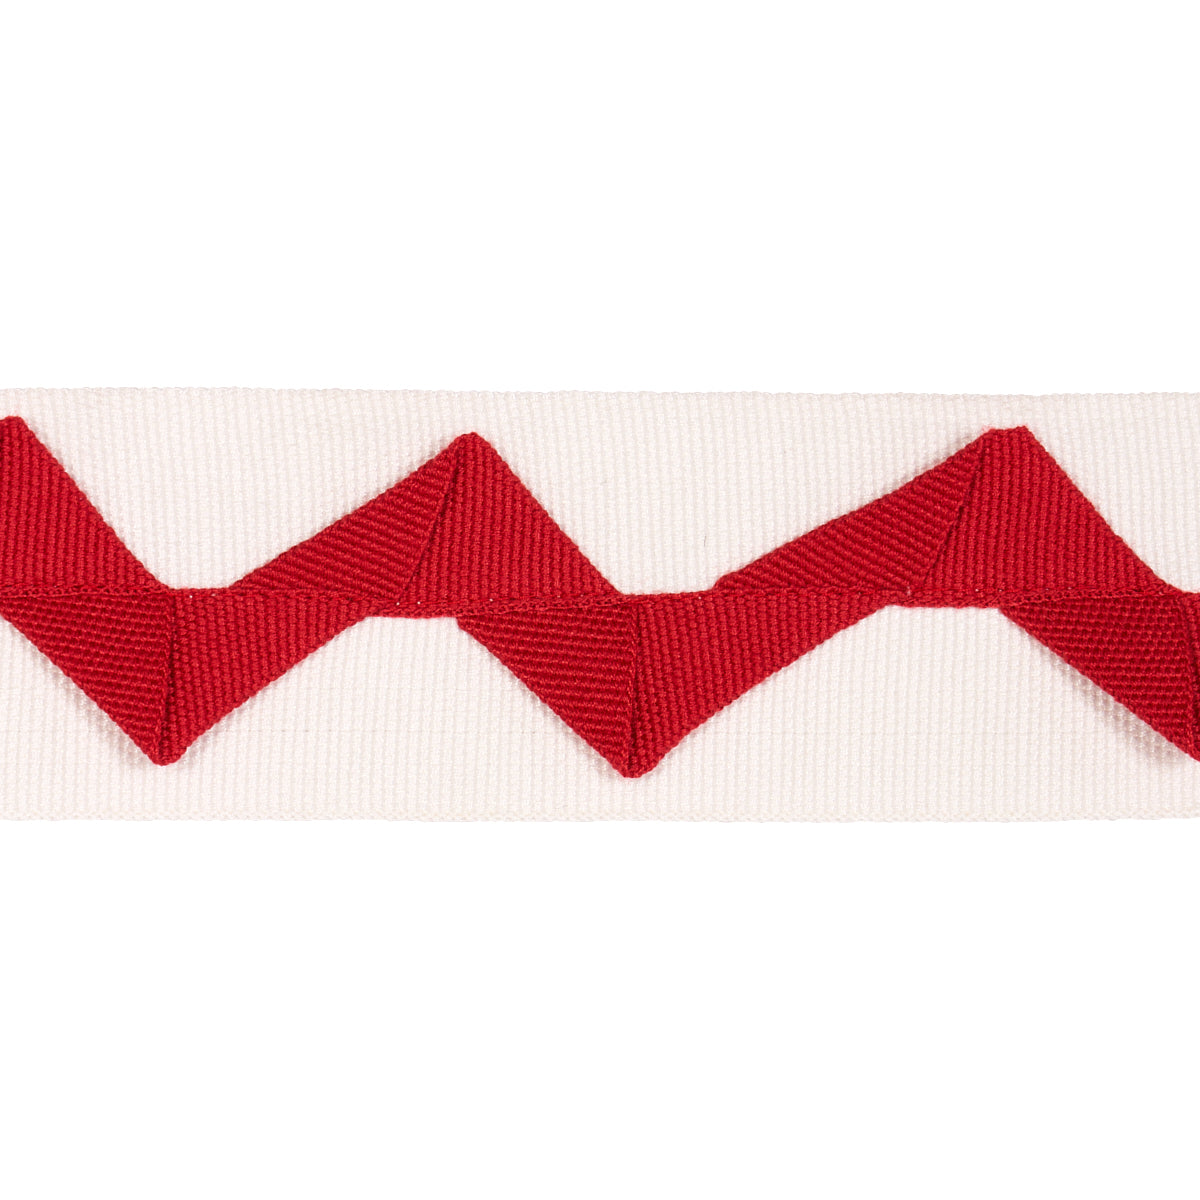 LAZARE APPLIQUÉ TAPE RED ON IVORY